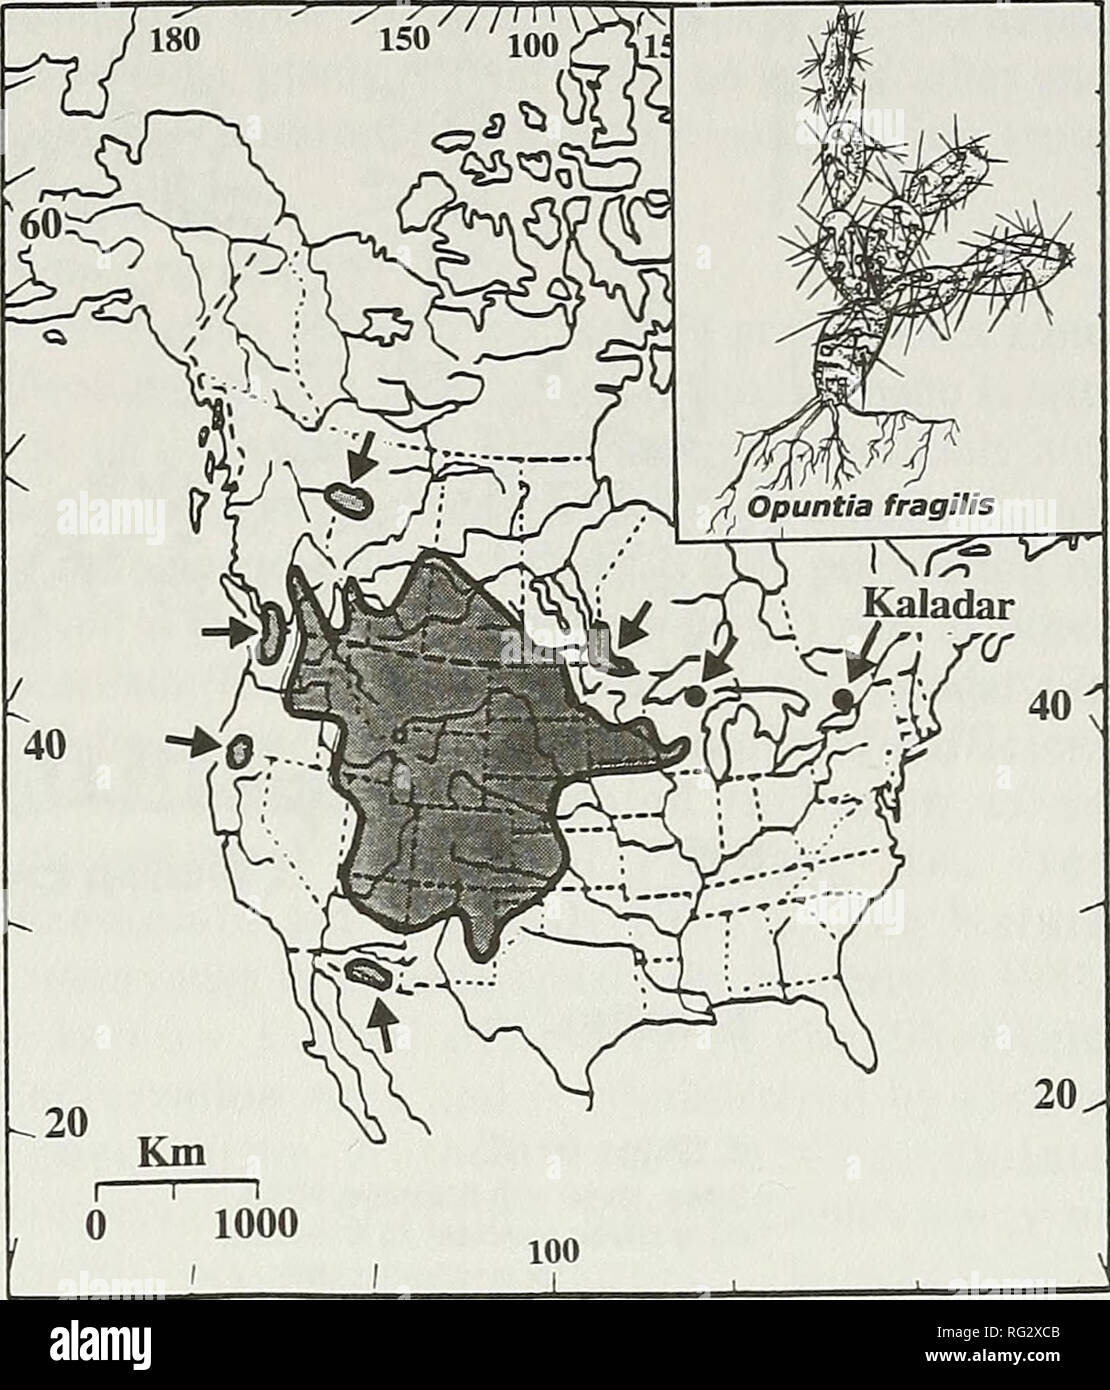 . The Canadian field-naturalist. 2000 Staniforth and Frego: Disjunct Cactus in Eastern Ontario 101 the Kaladar site in 1995 (Table 2); however, this argument hinges around the interpretation and defi- nition of what constitutes a &quot;western grassland species&quot;. Beschel (1967b) hsted 13 &quot;species of dis- tinctly western or southern affinity&quot; and a skink (Eumeces fasciatus) at Kaladar to support this hypothesis. On the other hand, Scoggan (1978) clas- sified 12 of Beschel's 13 &quot;western/southern&quot; species as either eastern (&quot;EE&quot;; i.e. Lechea intermedia, Panicum  Stock Photo